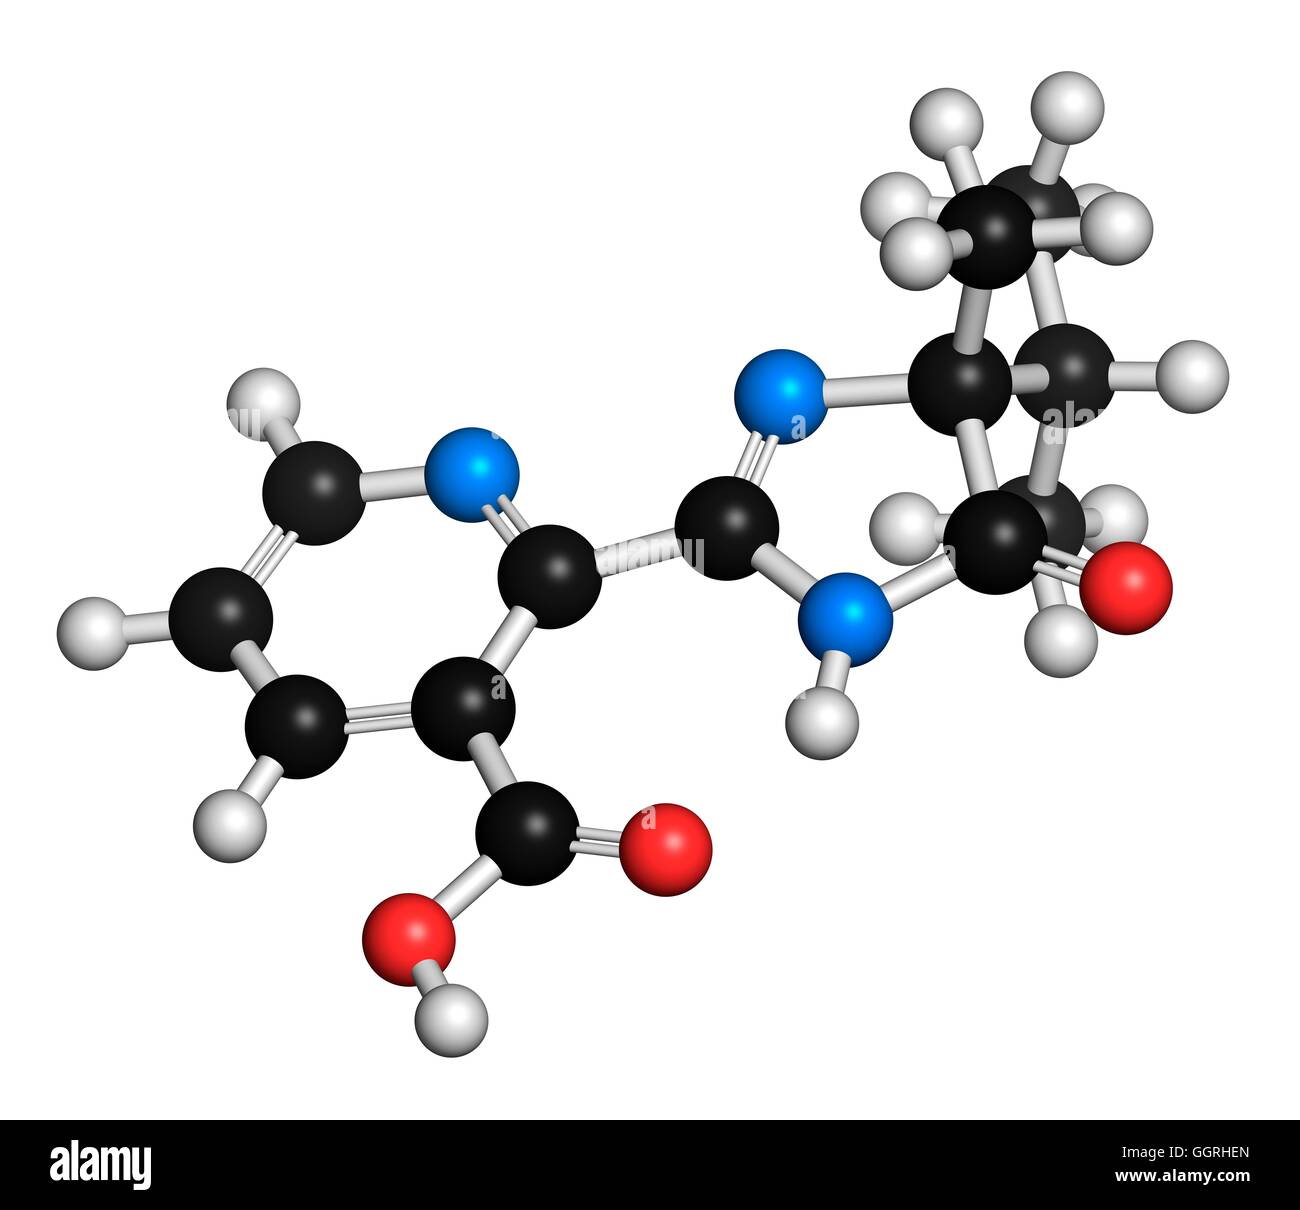 Imazapyr herbicide, molecular model. Atoms are represented as spheres with conventional colour coding: hydrogen (white), carbon (black), nitrogen (blue), oxygen (red). Illustration. Stock Photo